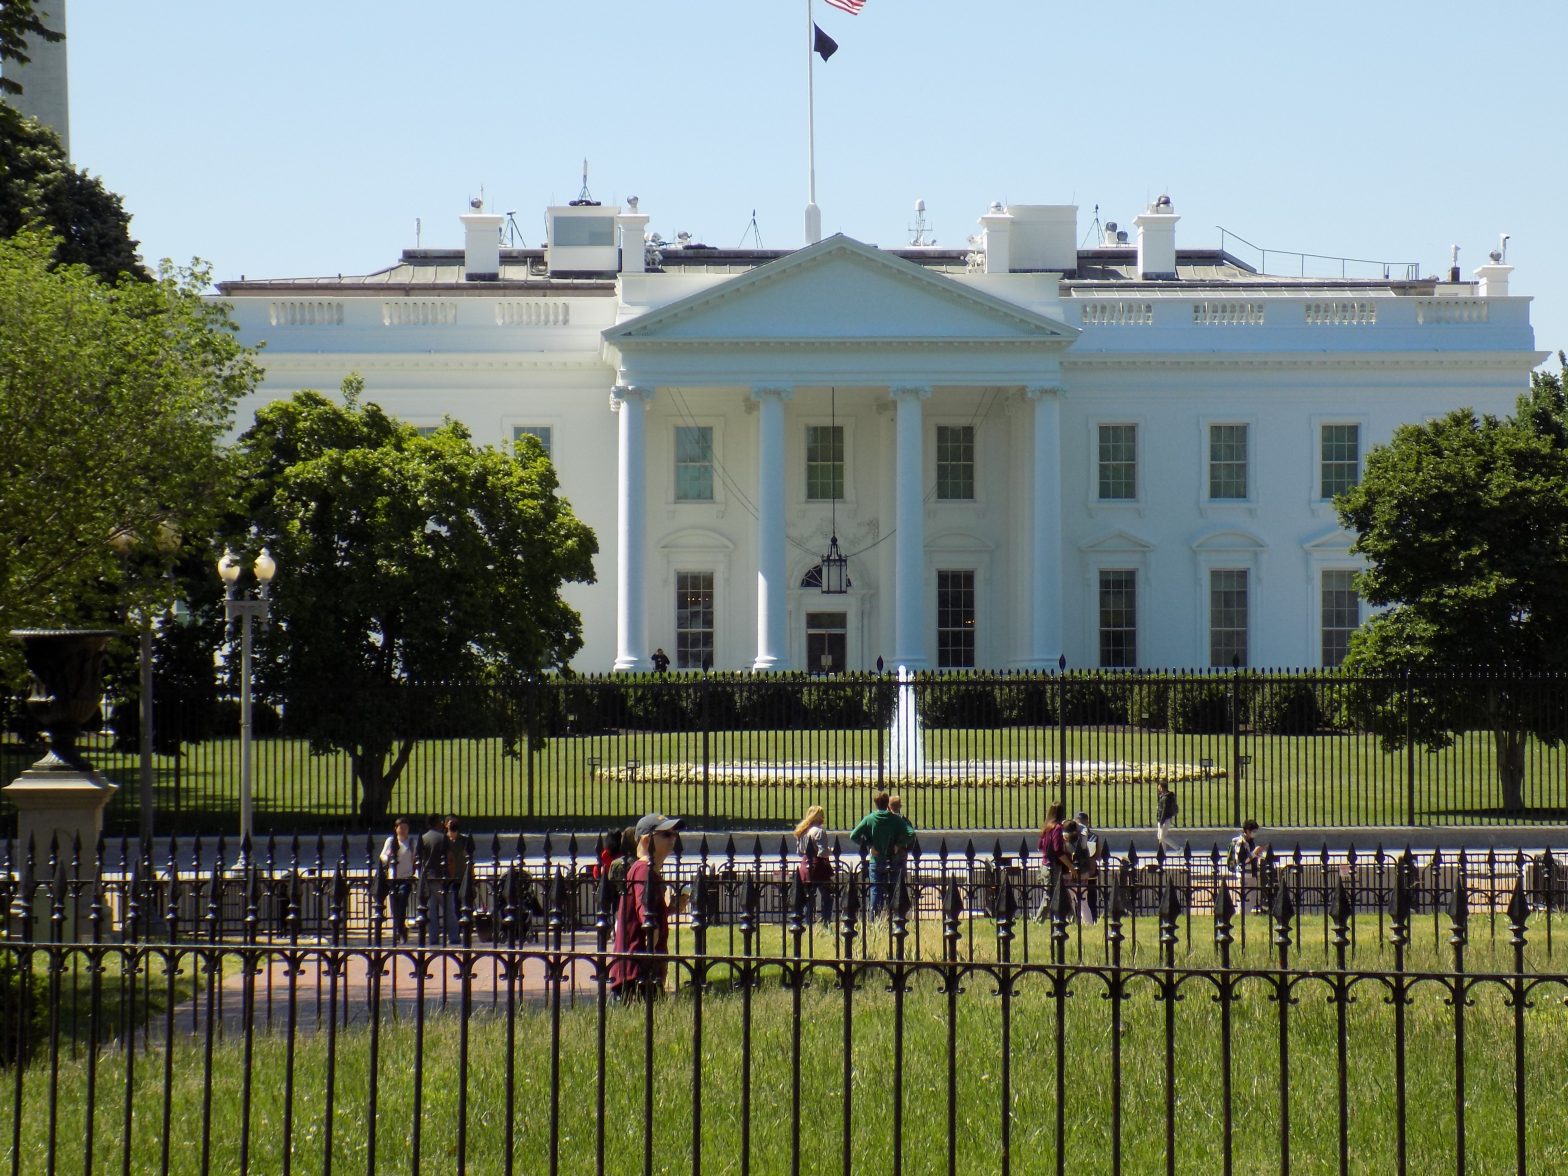 Indian American Groups Press White House on Vaccines for India